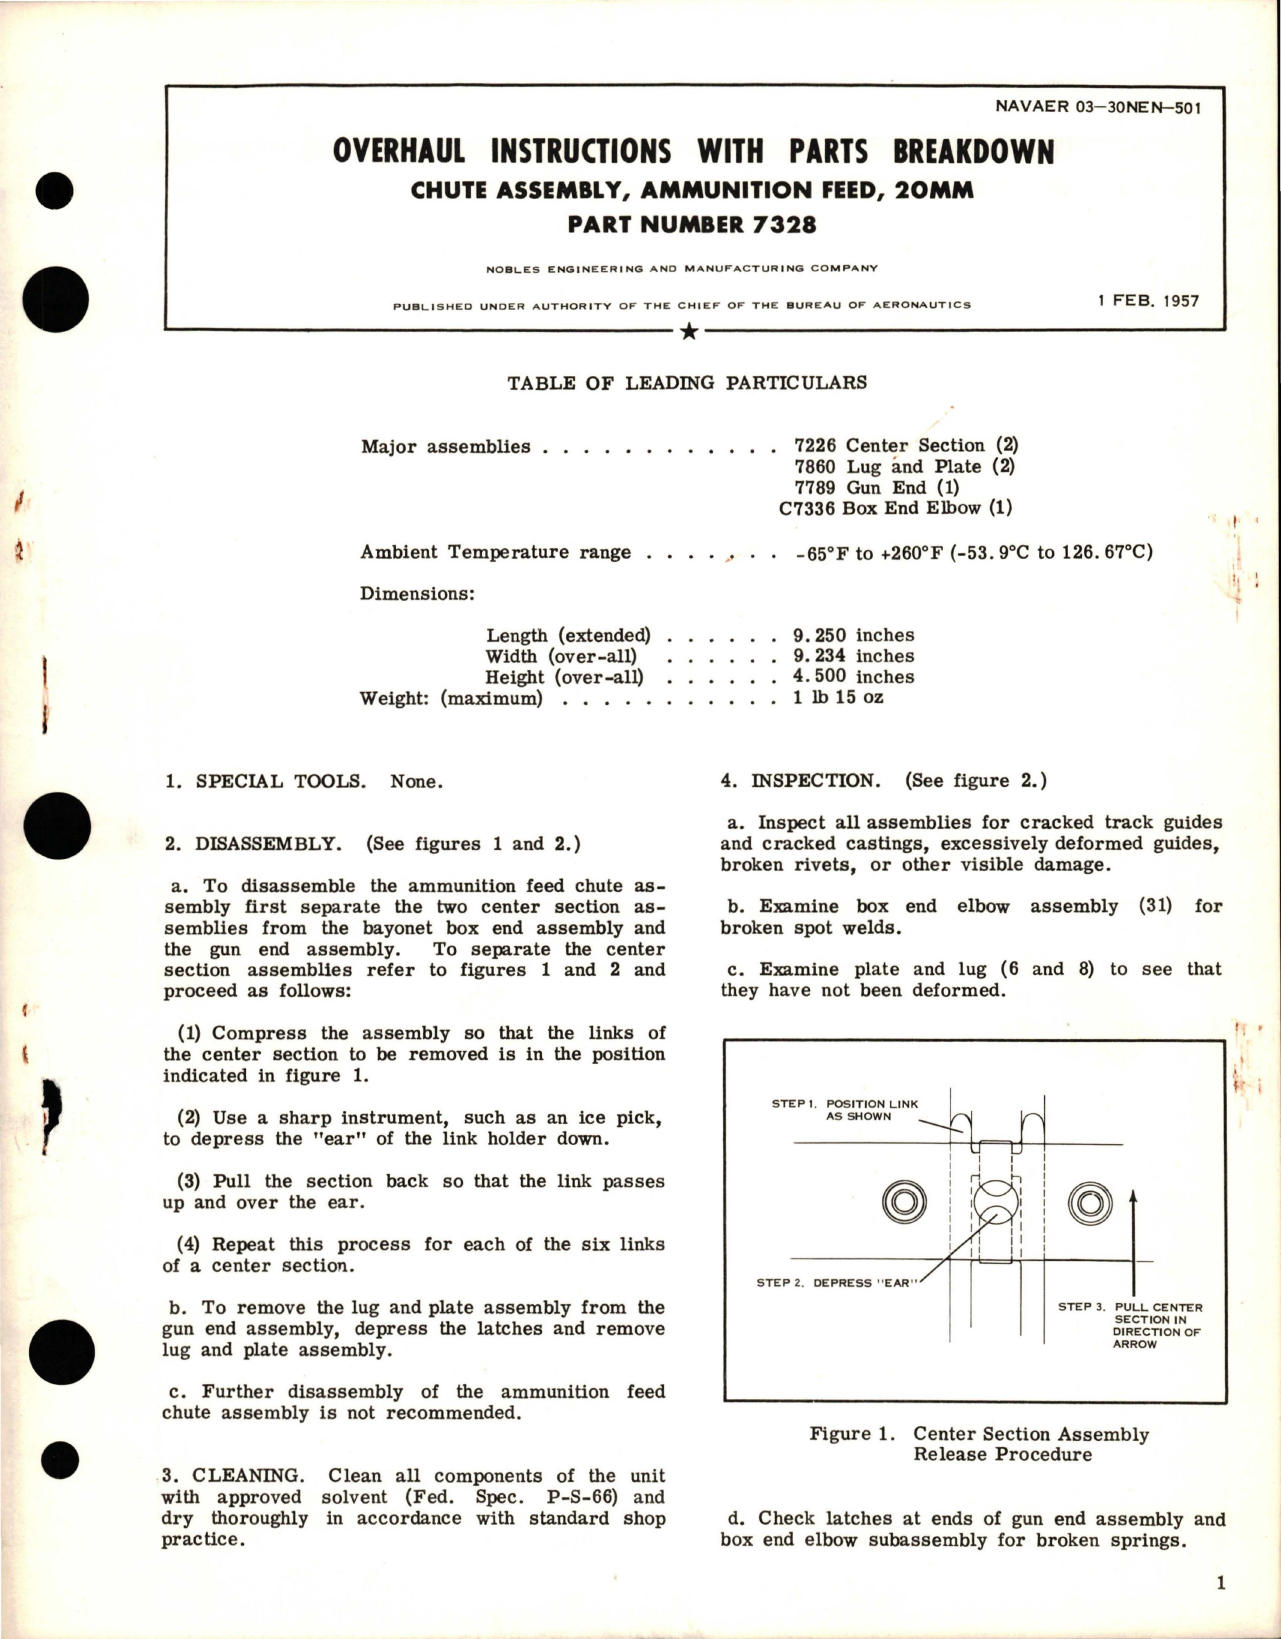 Sample page 1 from AirCorps Library document: Overhaul Instructions with Parts Breakdown for 20MM Ammunition Feed Chute Assembly - Part 7328